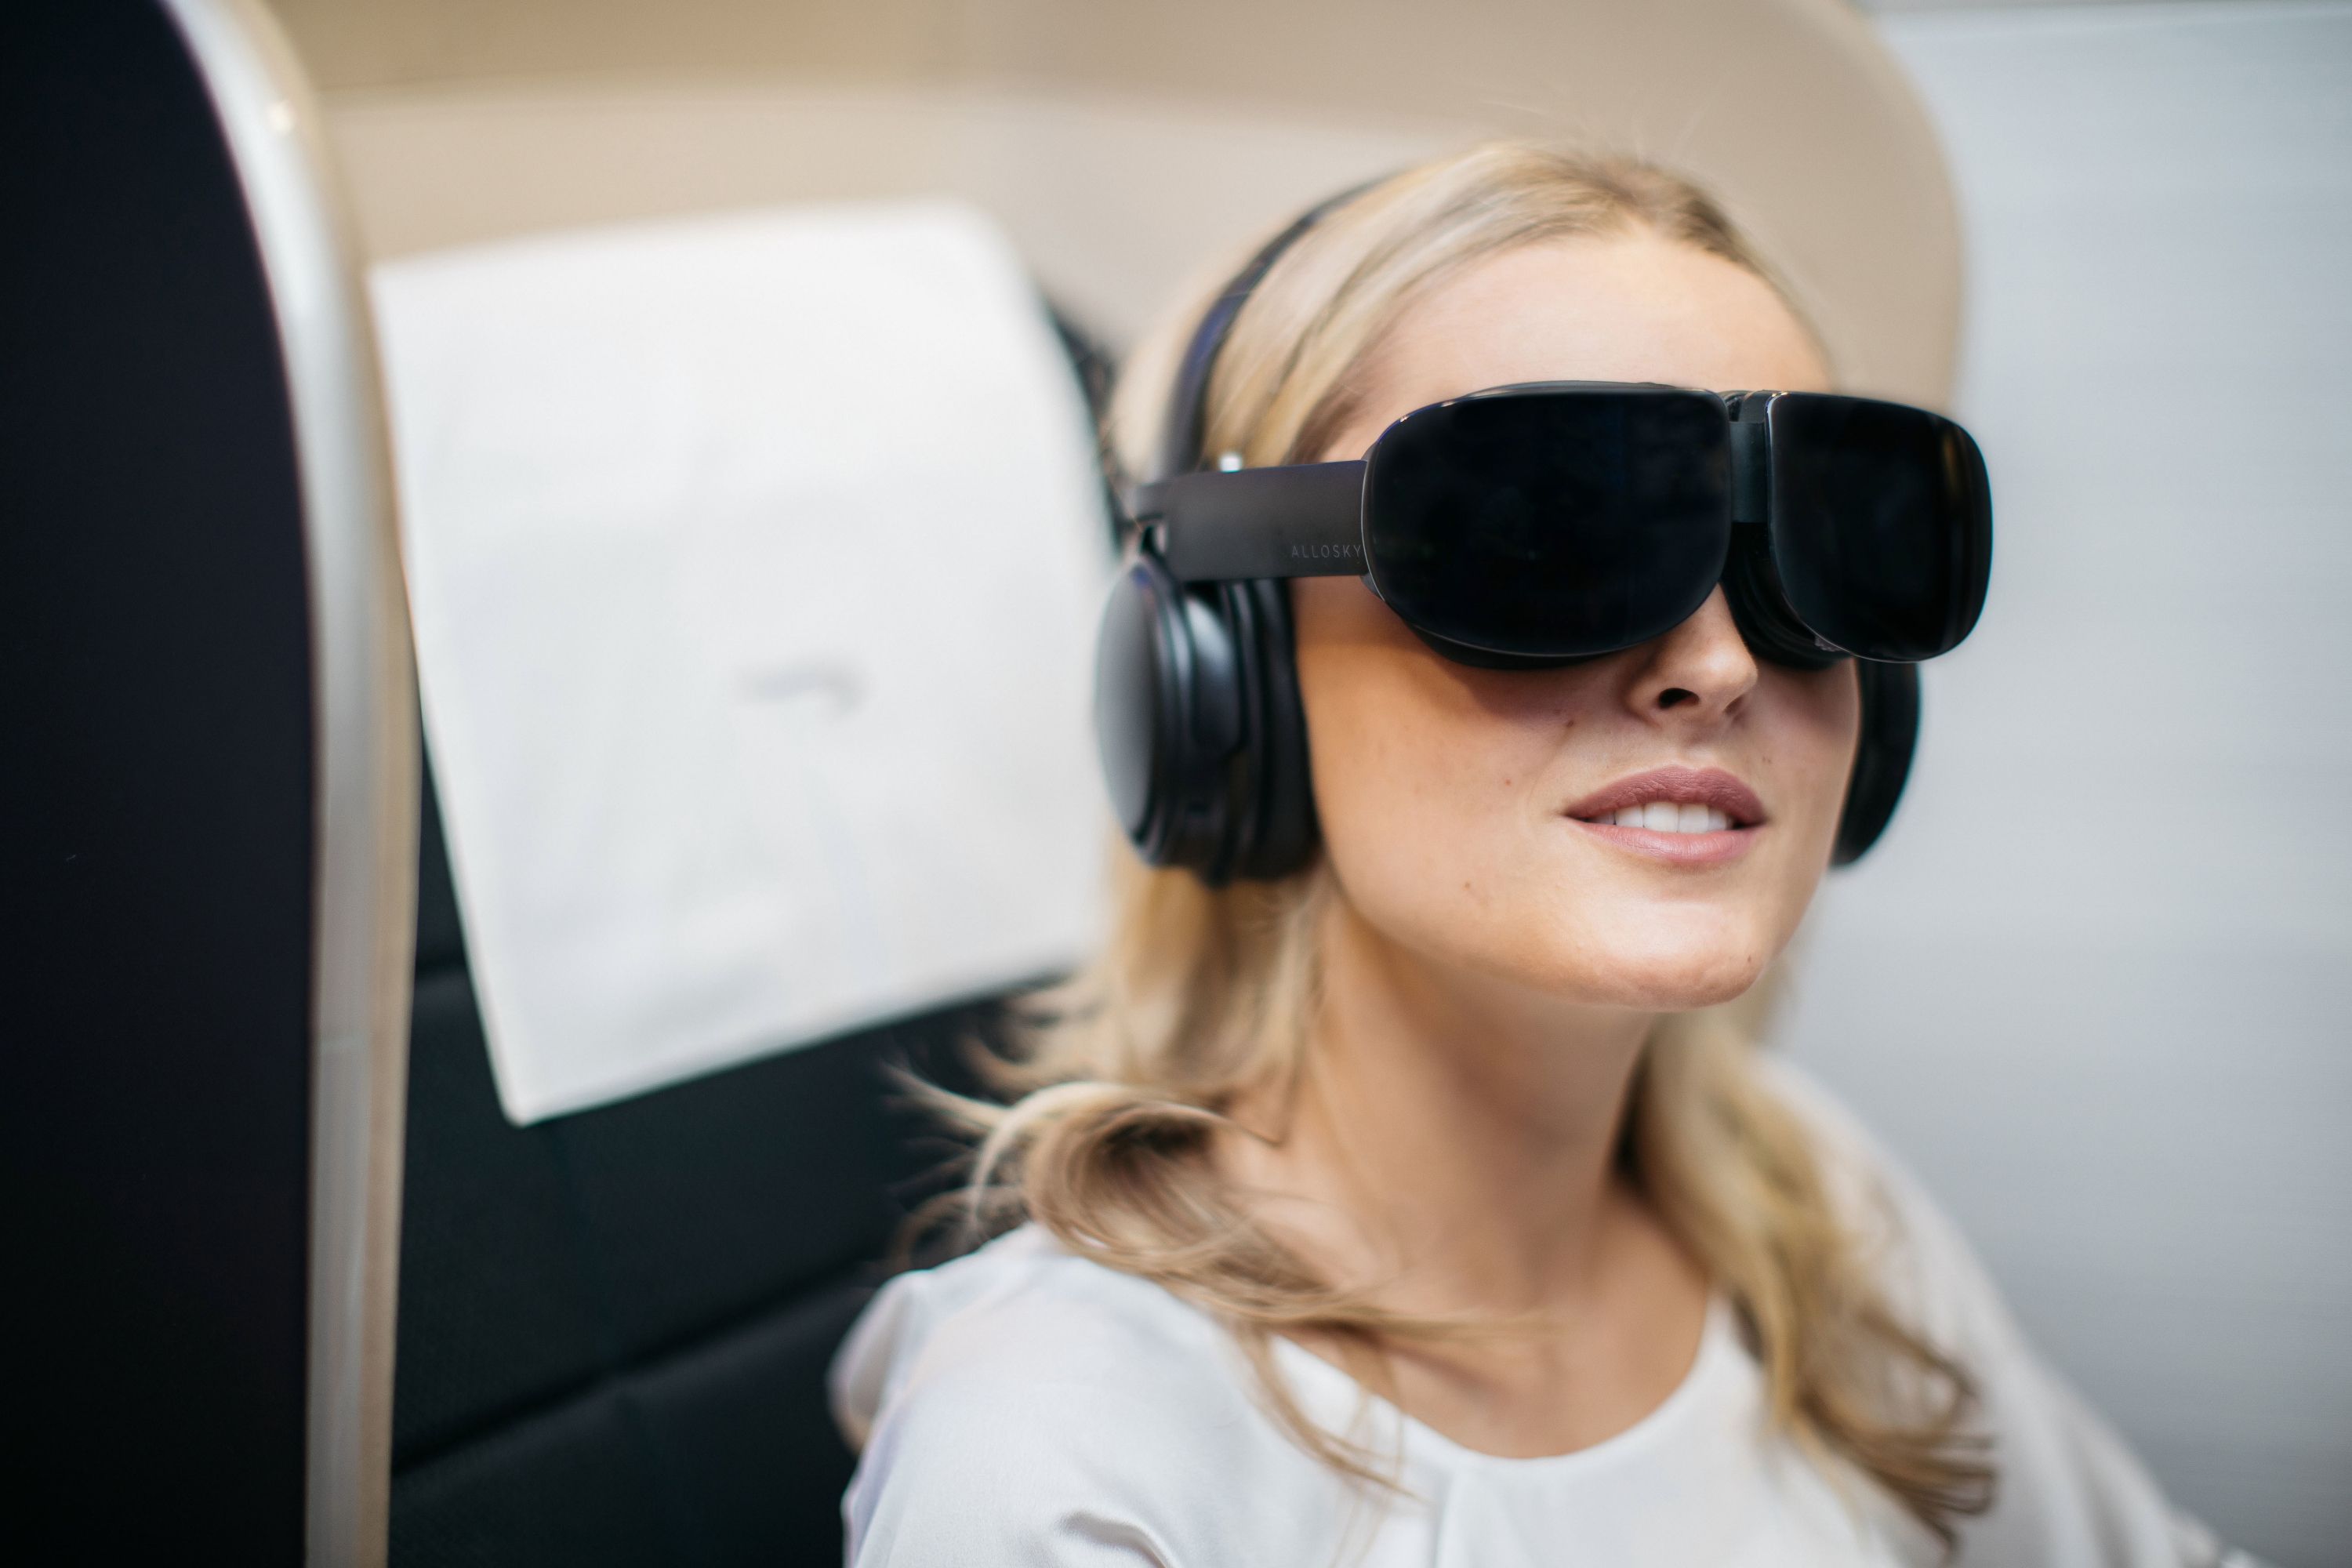 British Airways is testing an in-flight entertainment system that operates through a virtual reality headset. Running until the end of 2019, customers travelling on select flights in First from London Heathrow to New York JFK will be able to enjoy a selection of award-winning films, documentaries and travel programmes in 2D, 3D or 360° formats. Click to enlarge.